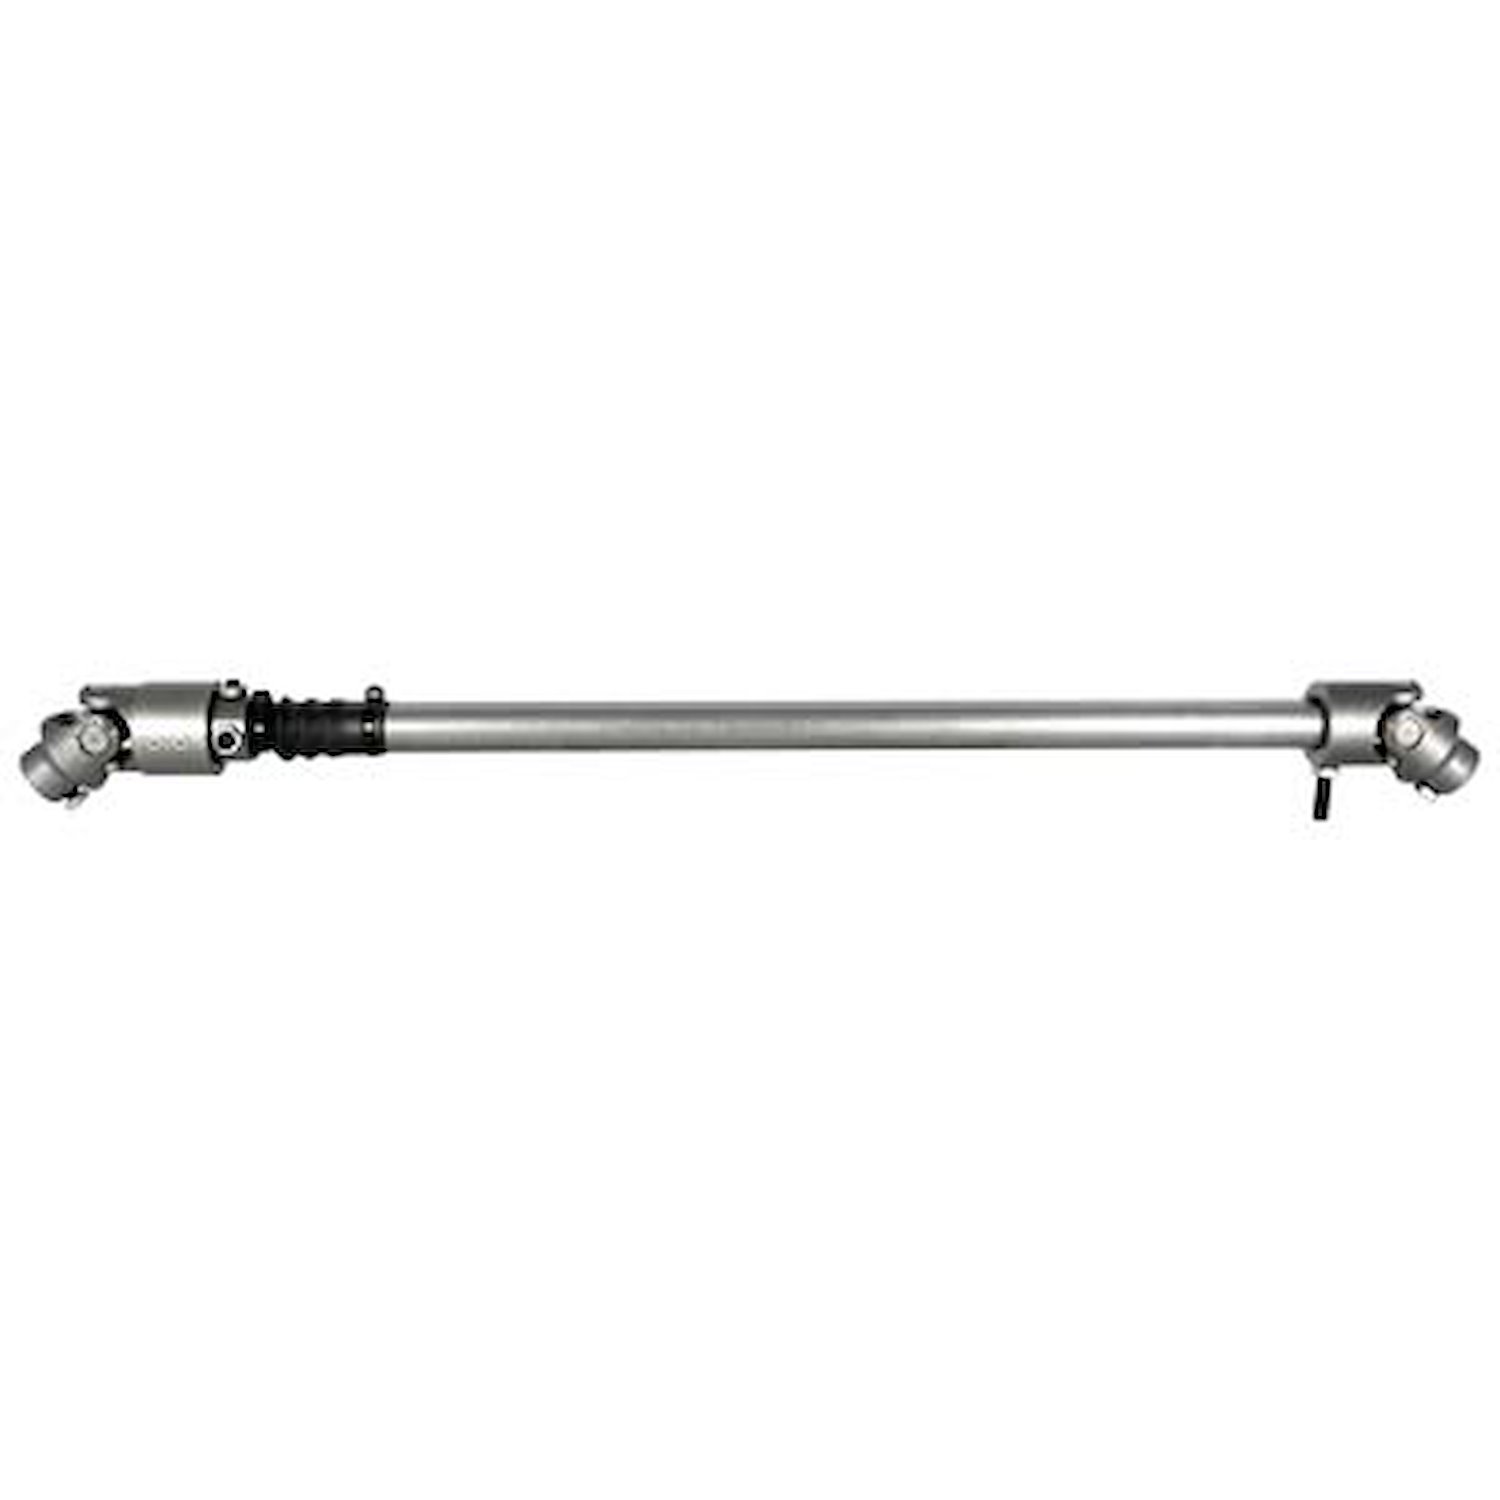 000985 Telescoping Steering Shaft for 1980-91 Ford F-100, F-150, F-250, F-350, Bronco